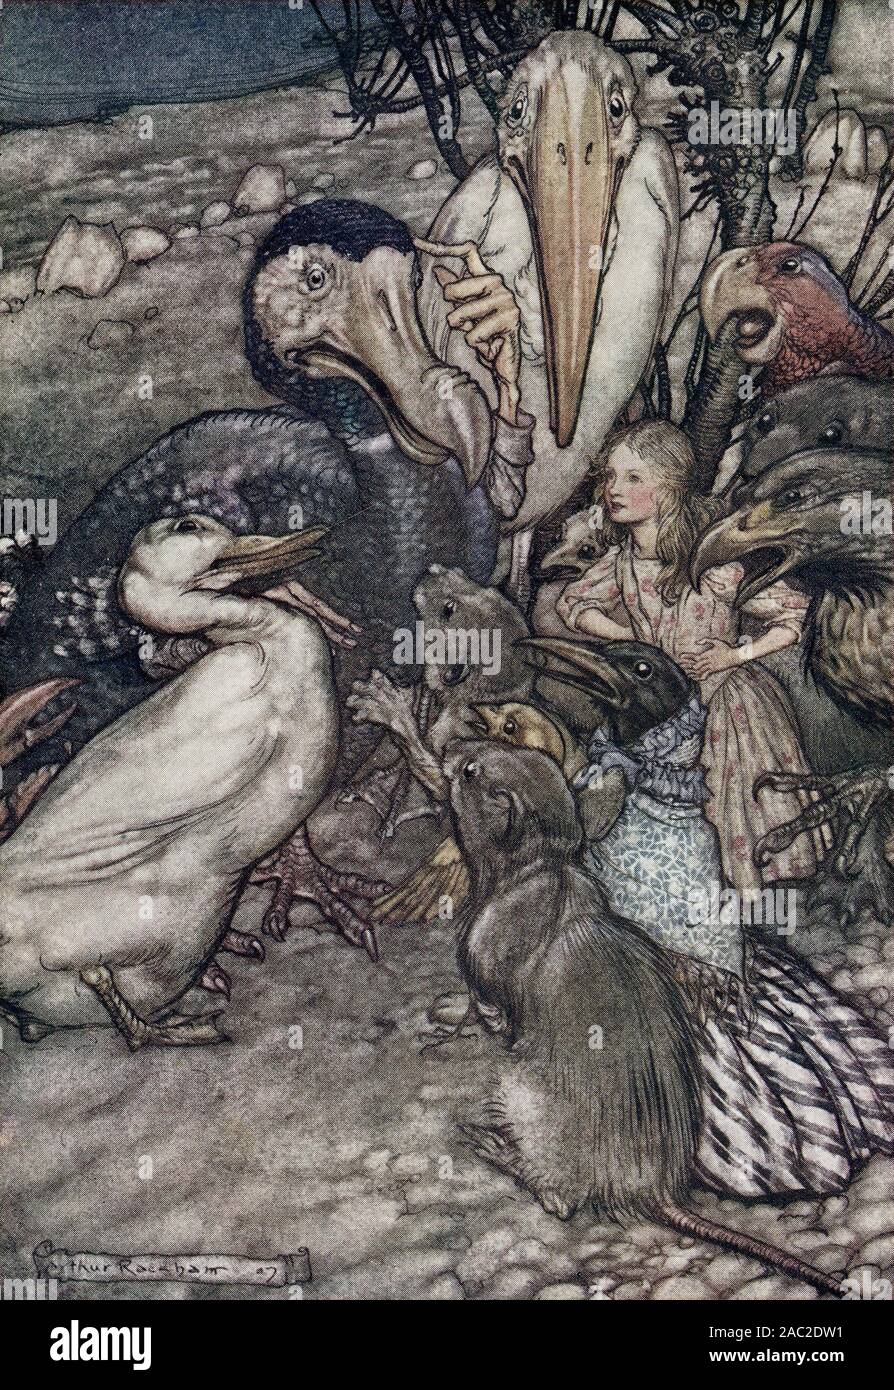 Arthur Rackham's illustration for the 1907 edition of Lewis Carroll's ALICE IN WONDERLAND - 'They all crowded round it panting and asking, 'But who has won?'' Stock Photo